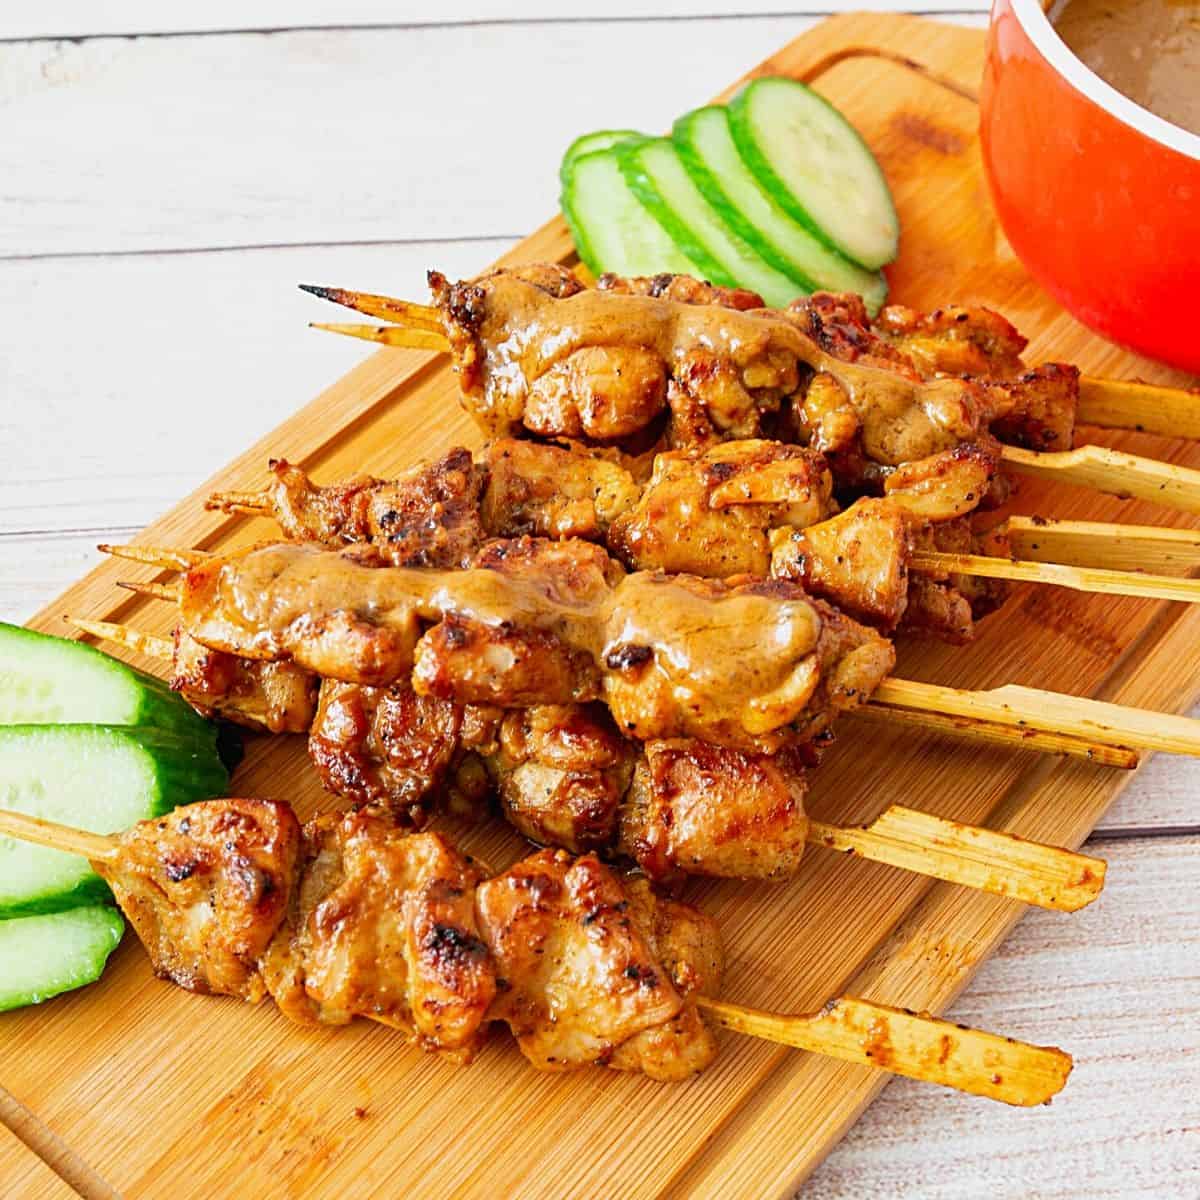 Grilled skewers with chicken and peanut sauce on board.